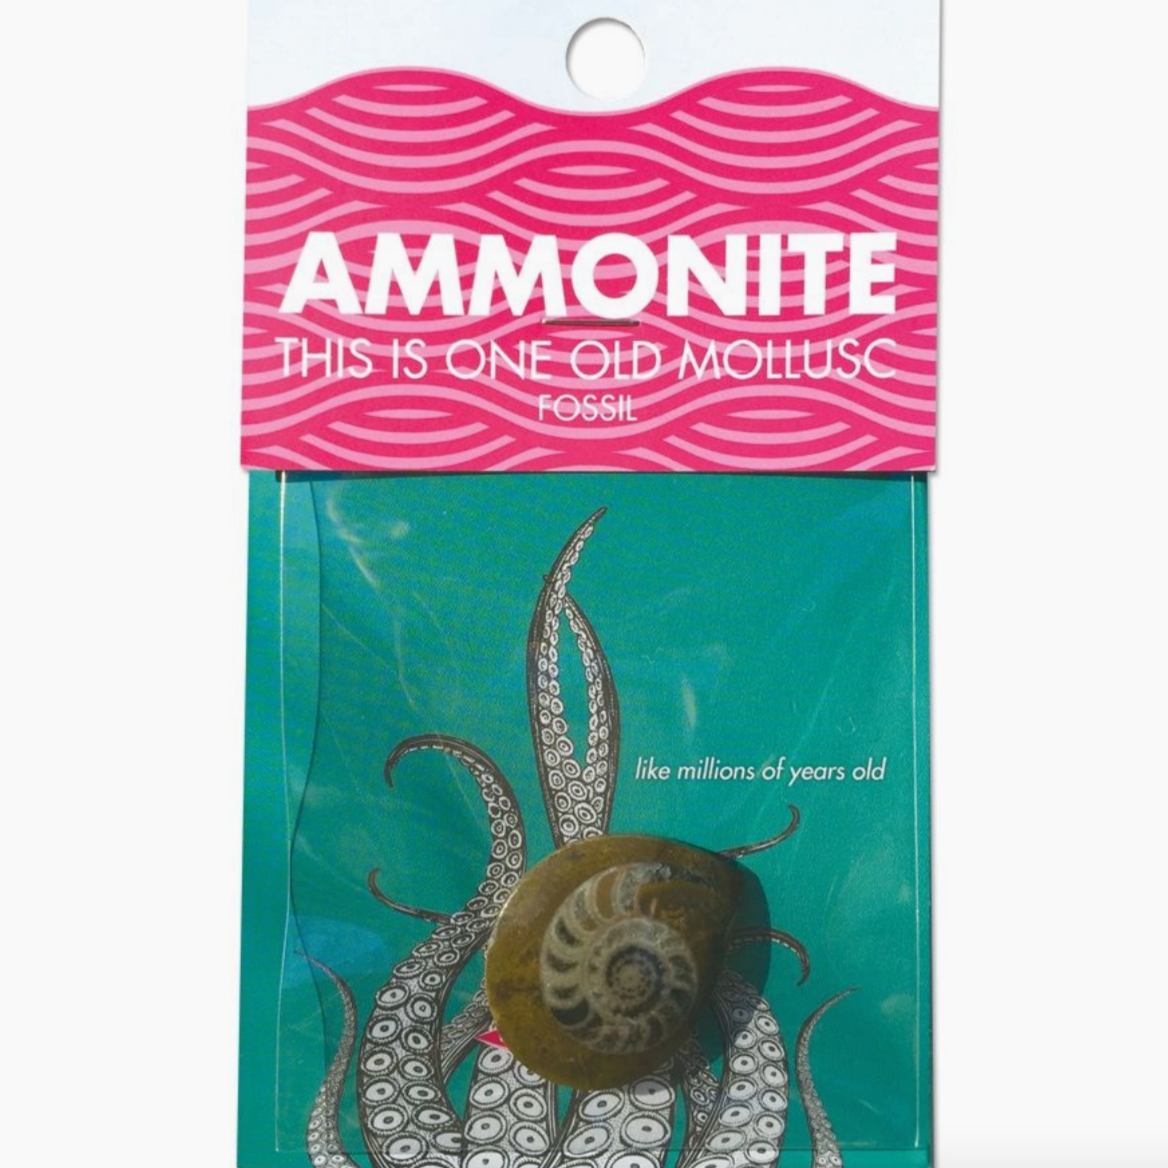 ammonite in packaging that rreads "ammonite, this is one old mollusc fossile- like millions of years old"